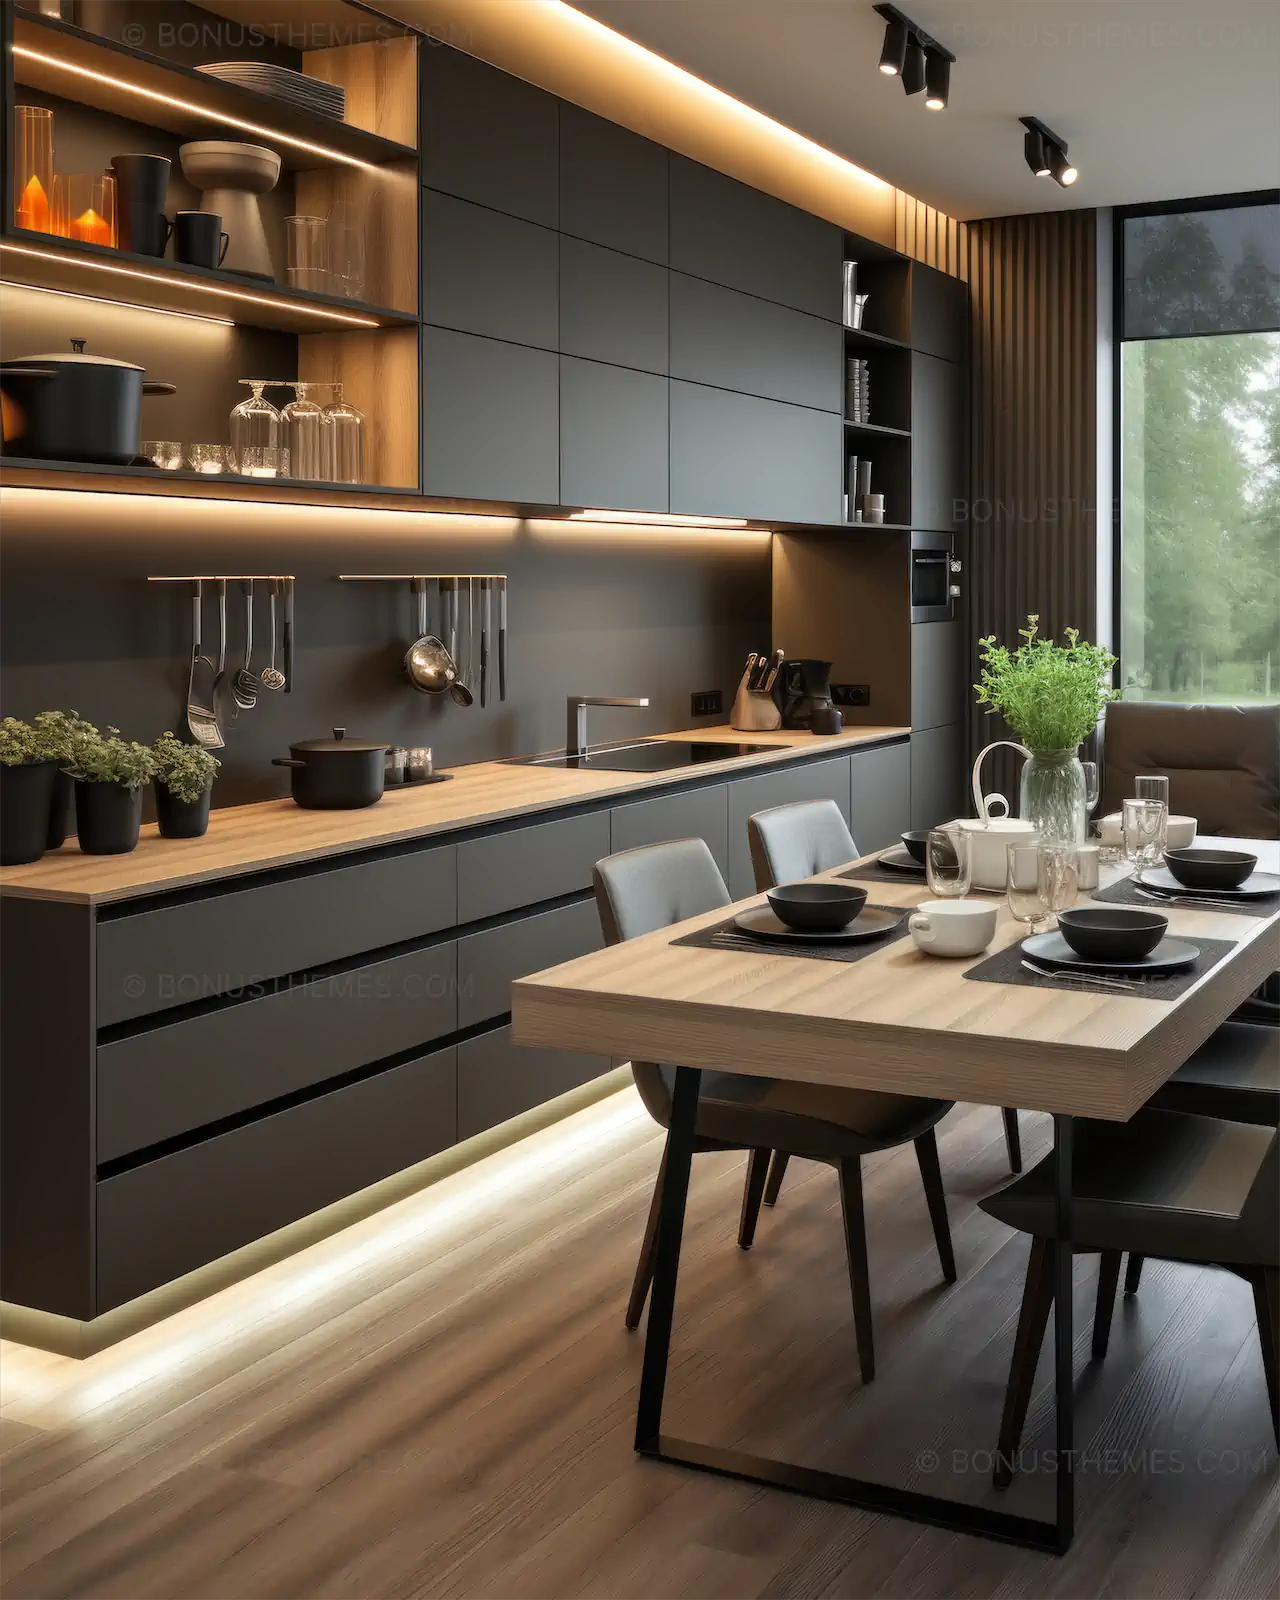 Kitchen with black furnitures and hidden lights